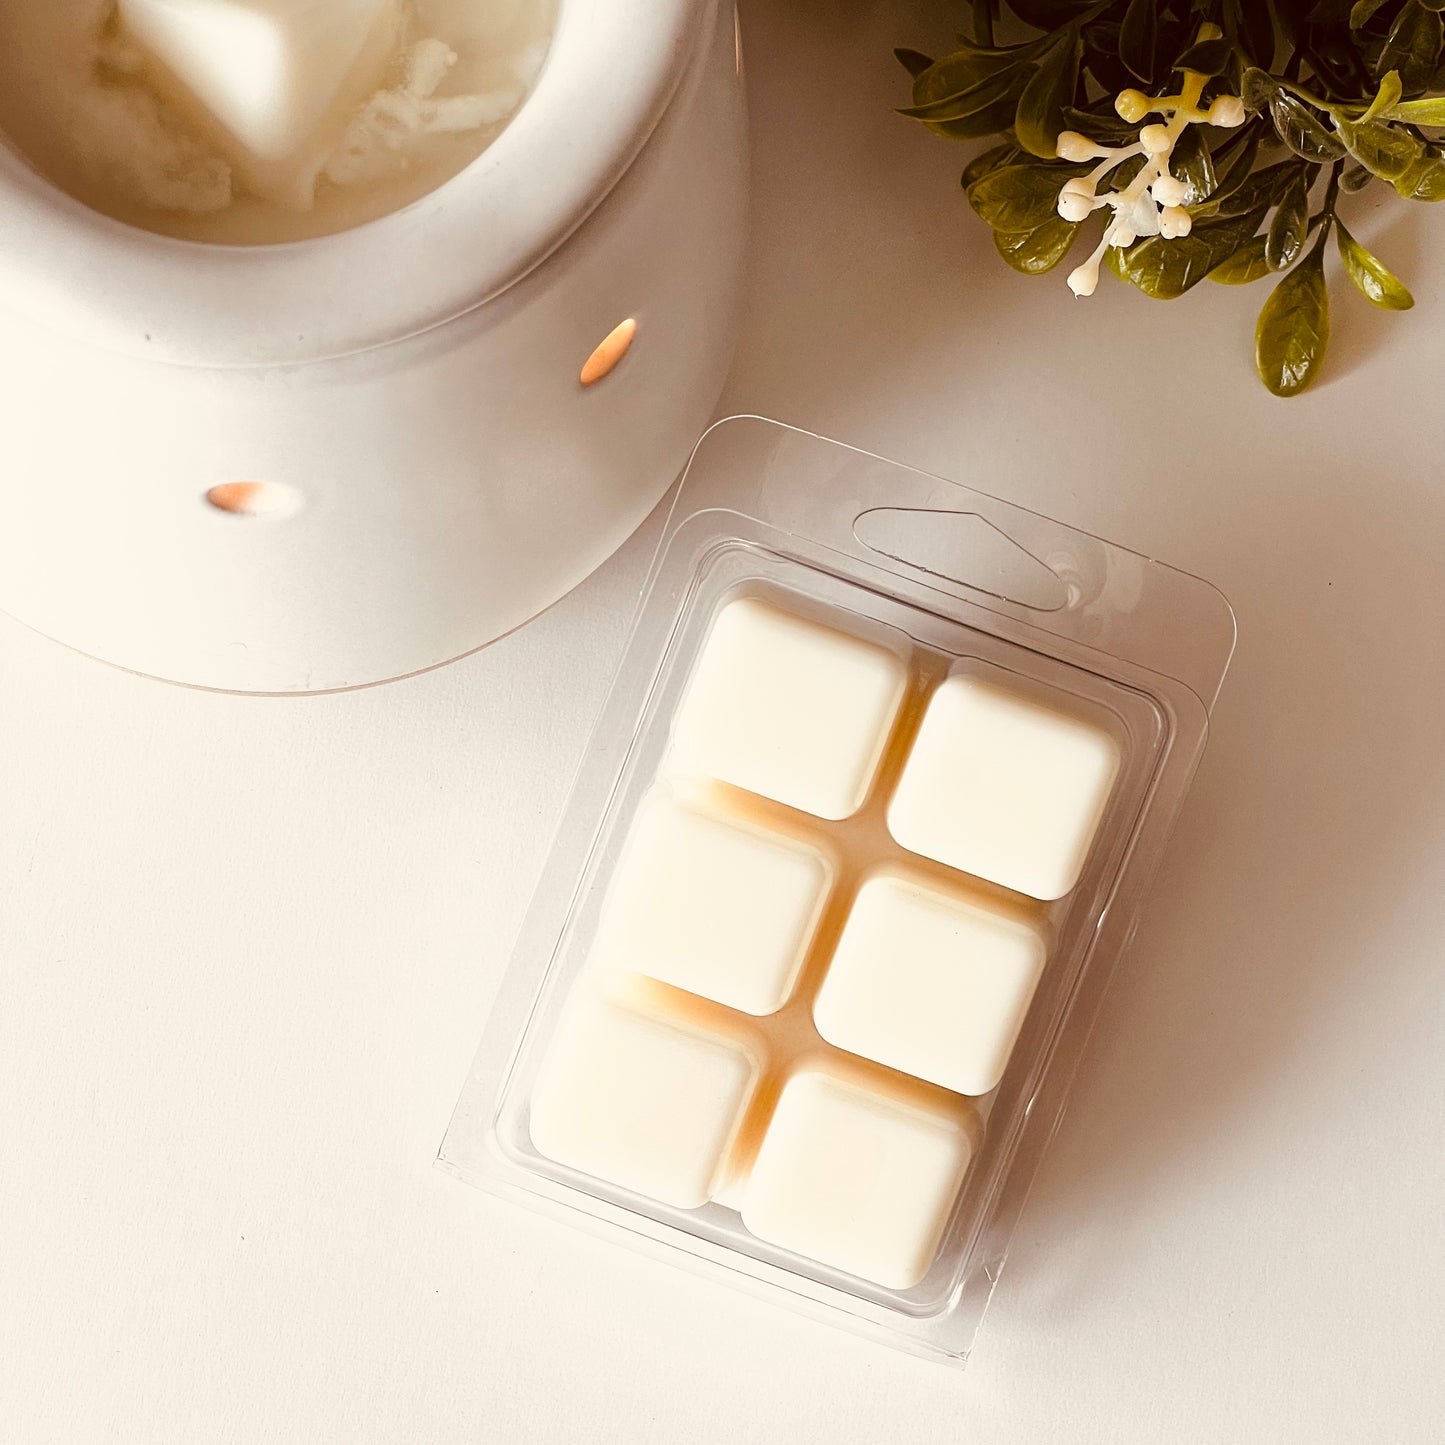 ADULTING IS HARD - 2.5 oz Soy Wax Melts